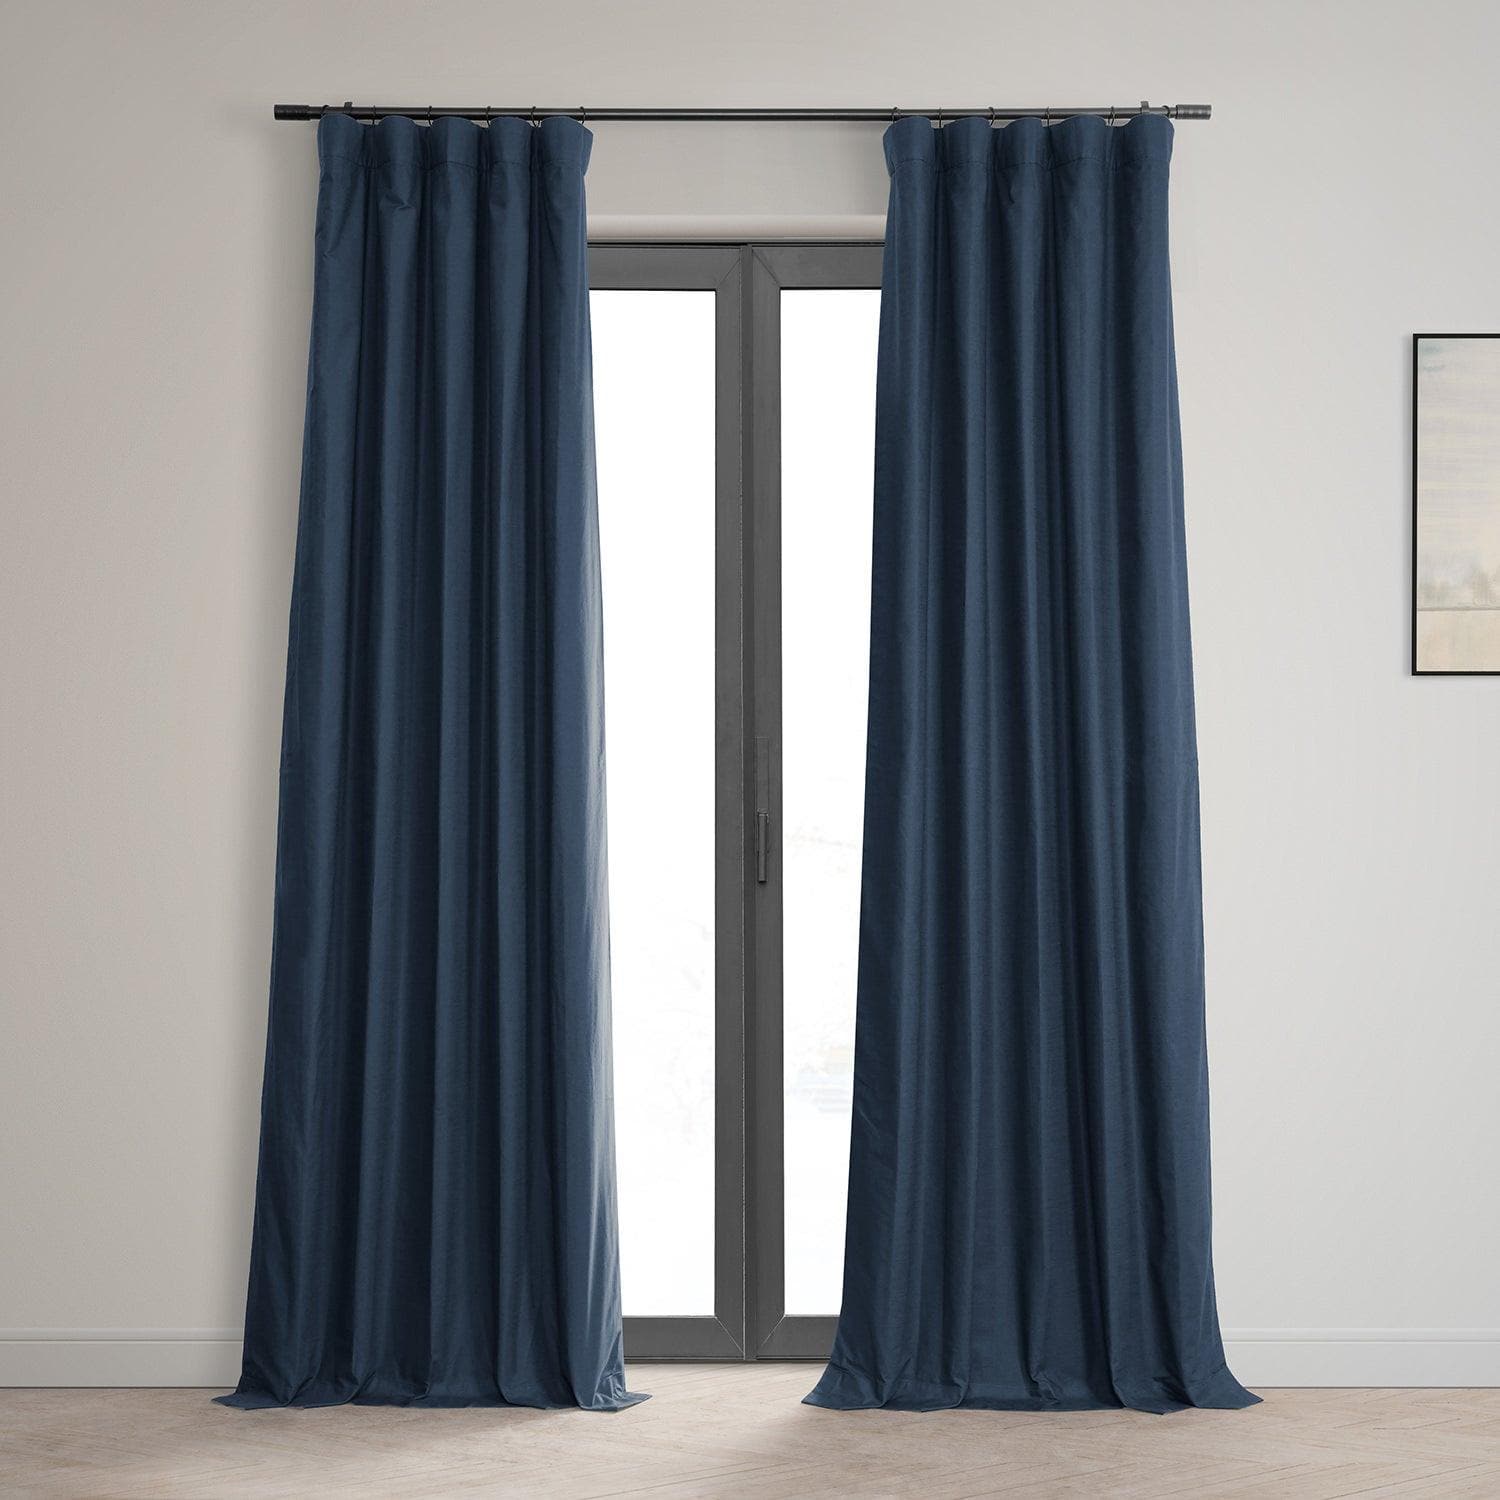 Noble Navy Dune Textured Cotton Hotel Blackout Curtain